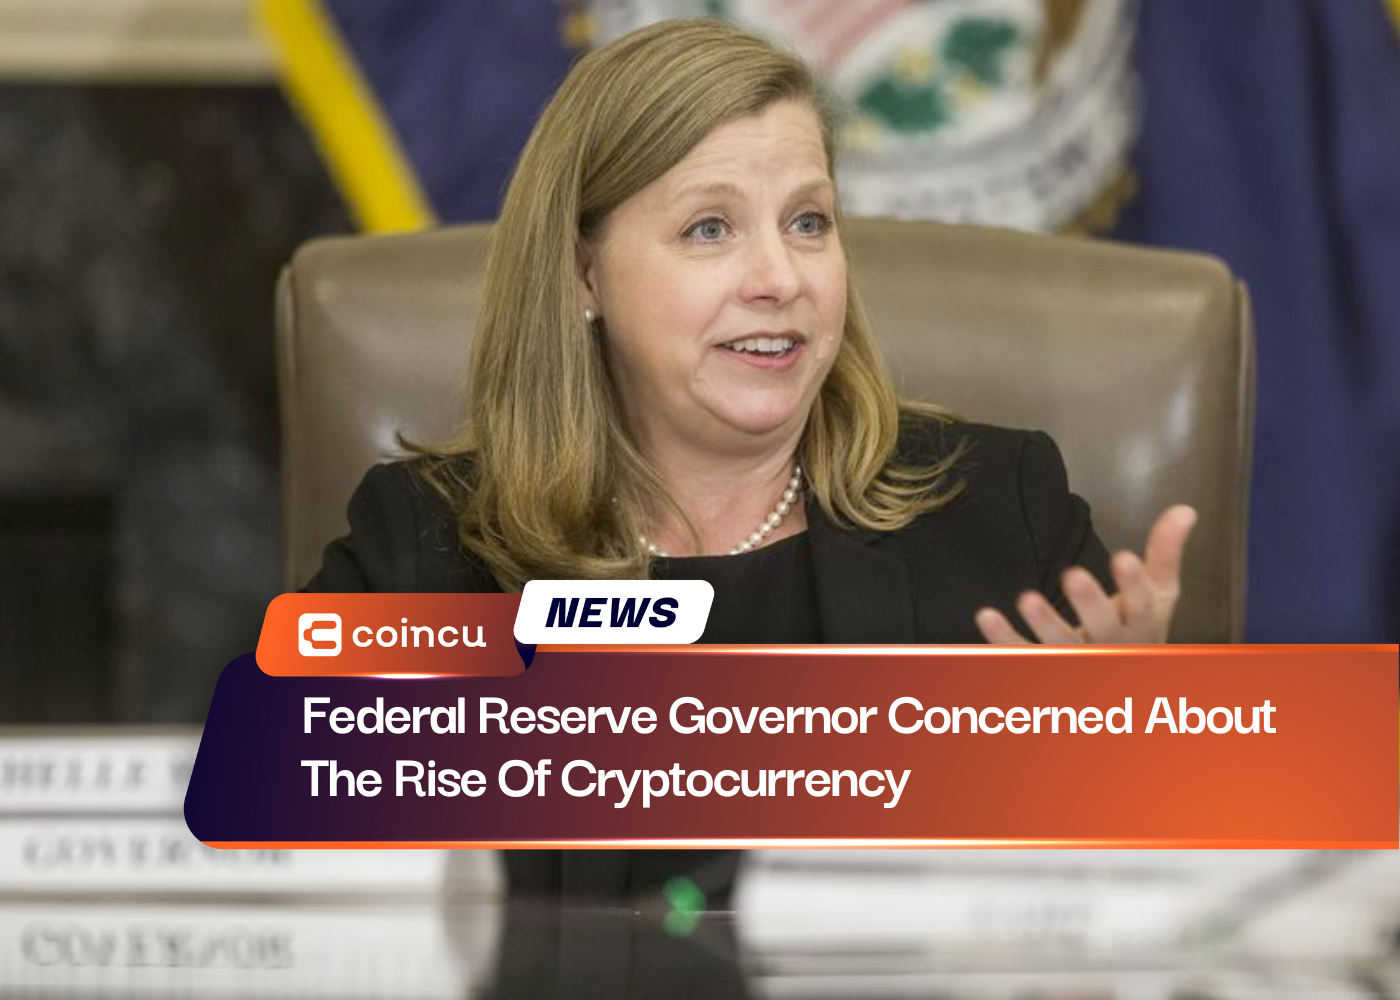 Federal Reserve Governor Concerned About The Rise Of Cryptocurrency